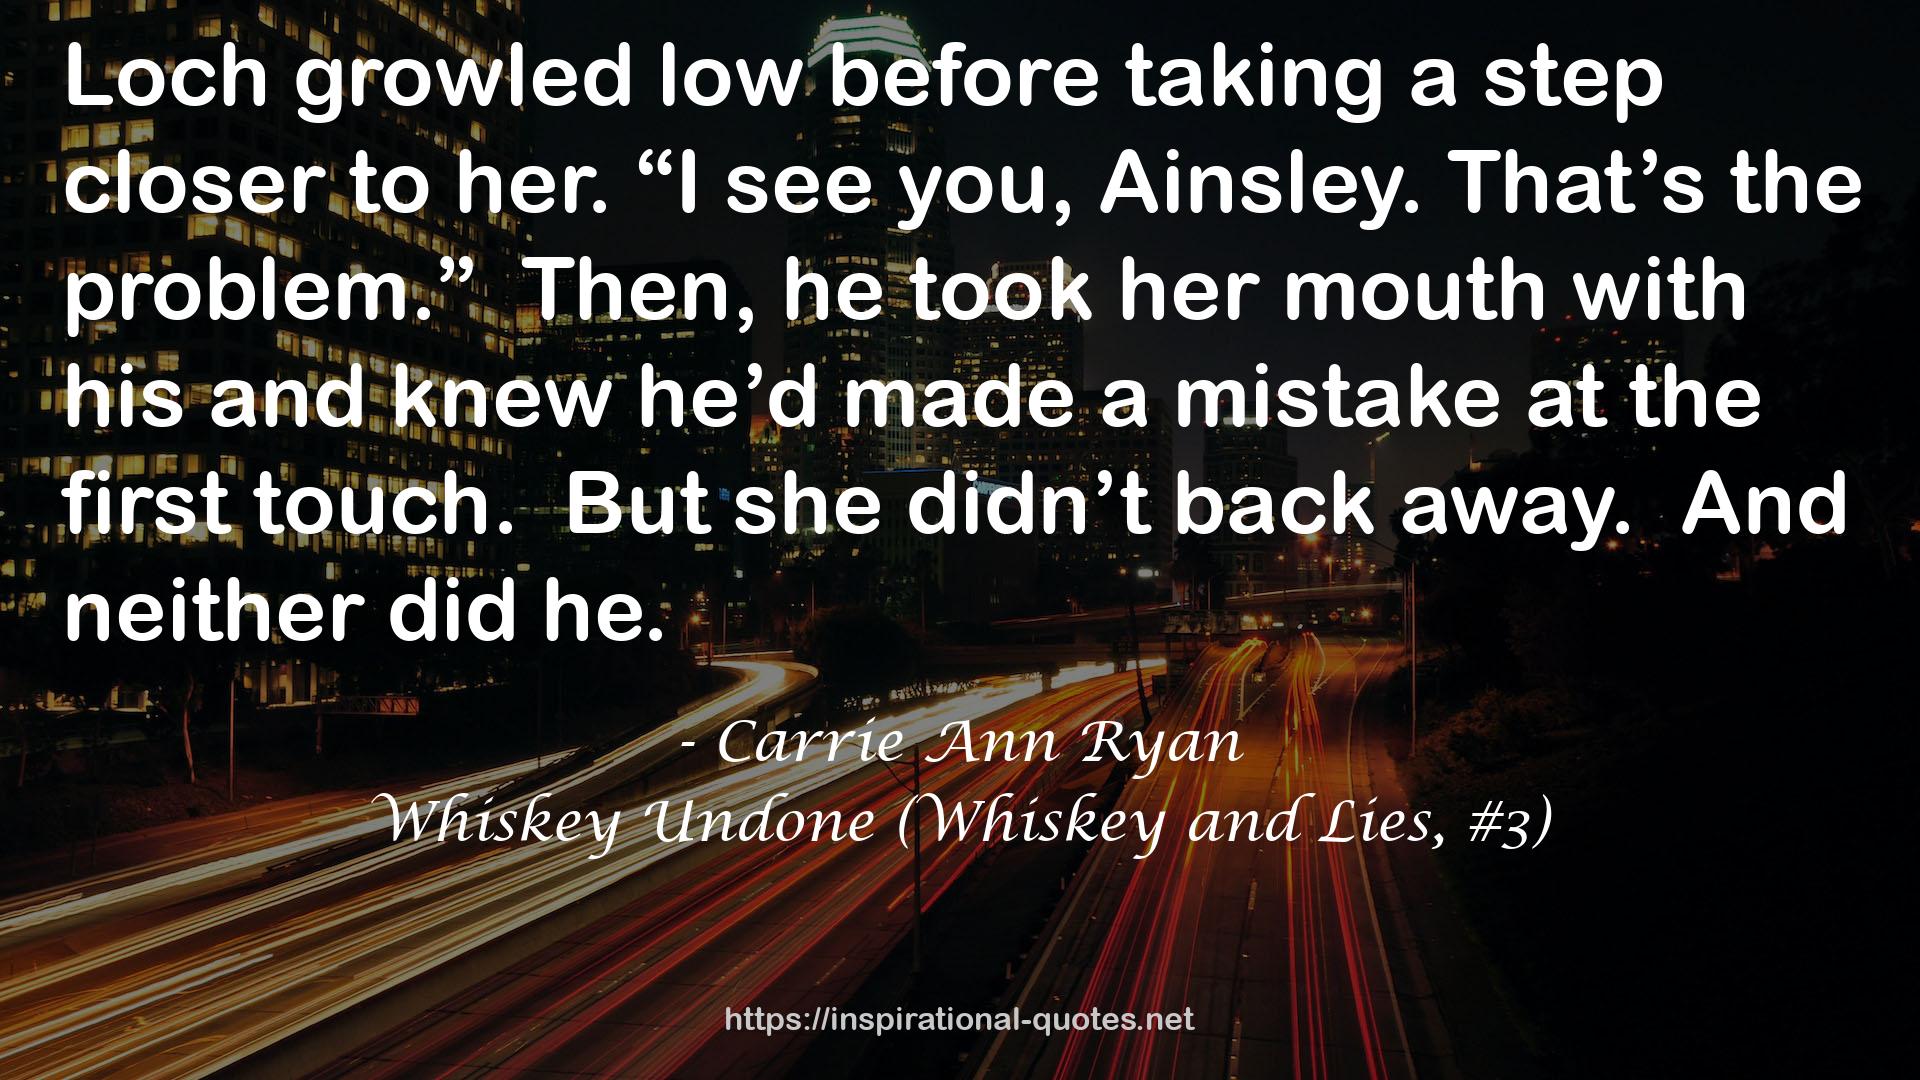 Whiskey Undone (Whiskey and Lies, #3) QUOTES